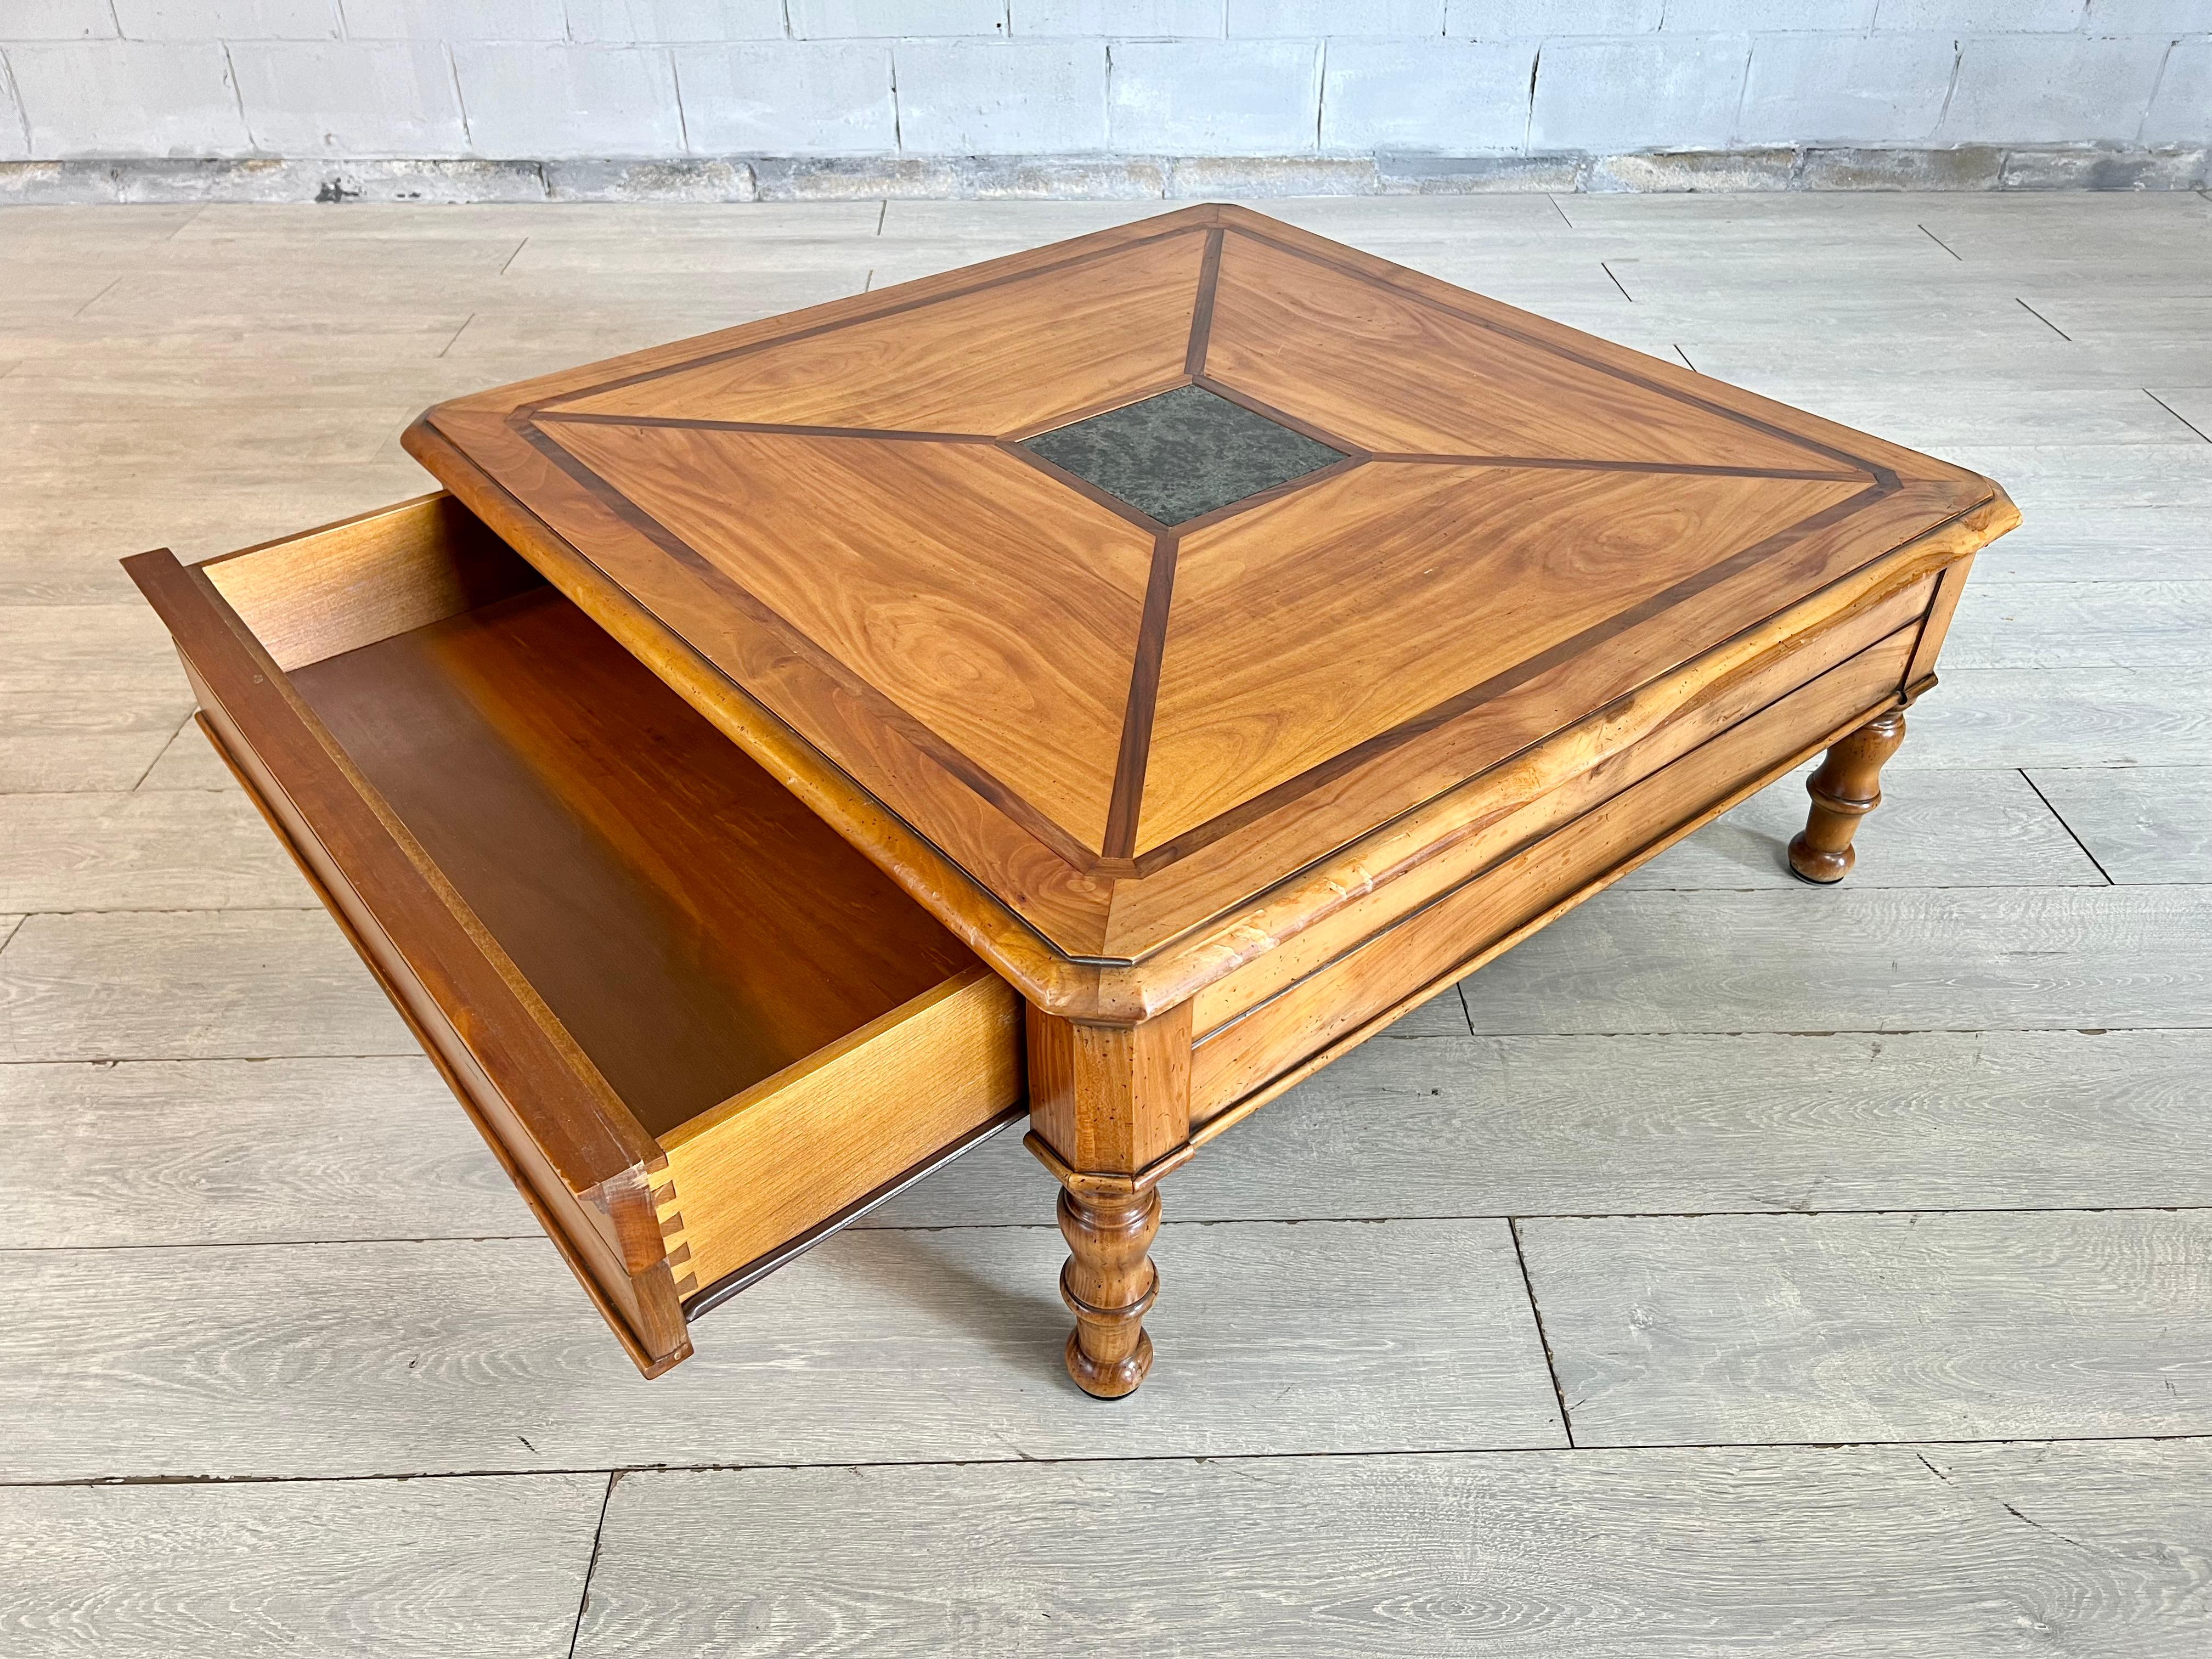 20th Century Intricate Swiss Square Coffee Table With Geometric Design and Marble Inlay For Sale